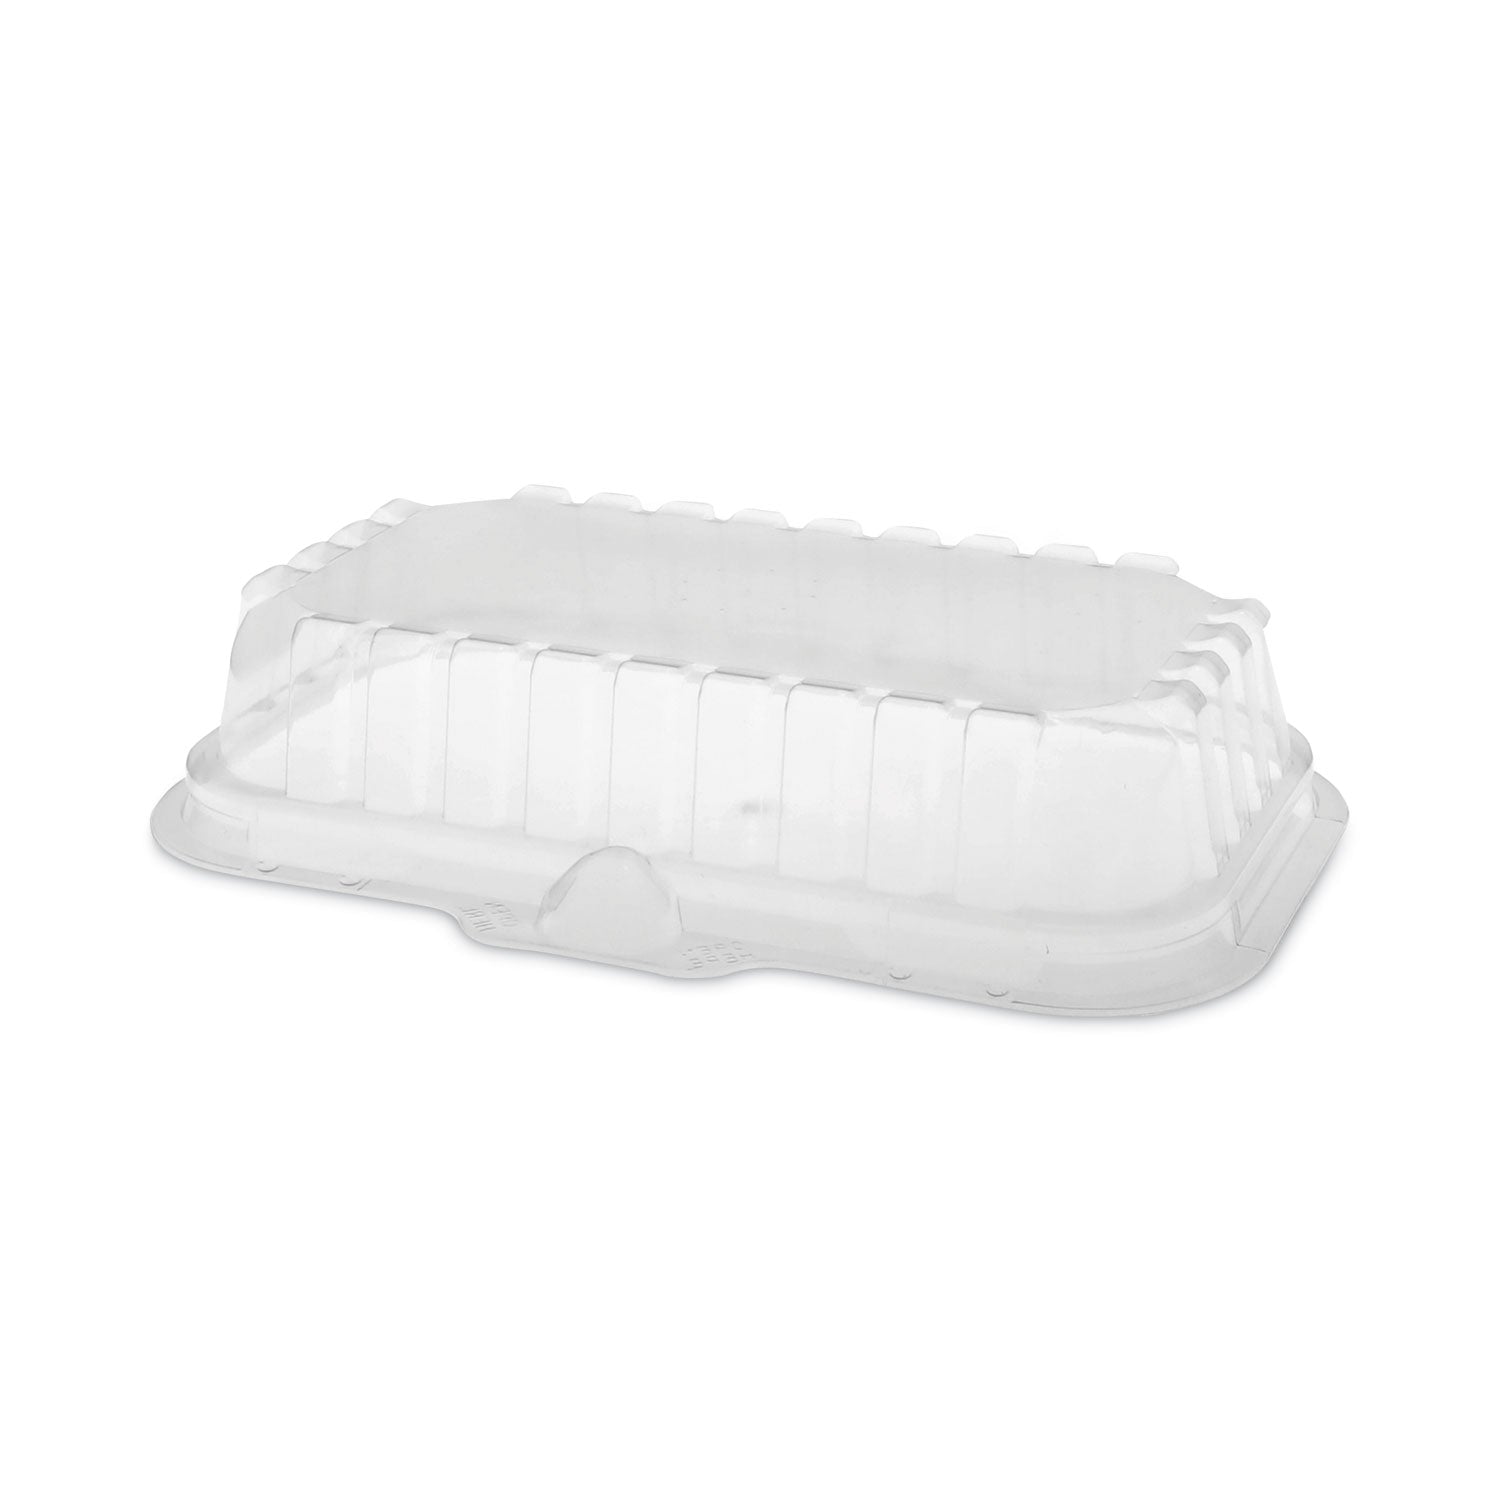 ops-dome-style-lid-17s-shallow-dome-83-x-48-x-15-clear-plastic-252-carton_pct0ci8s17s0000 - 2